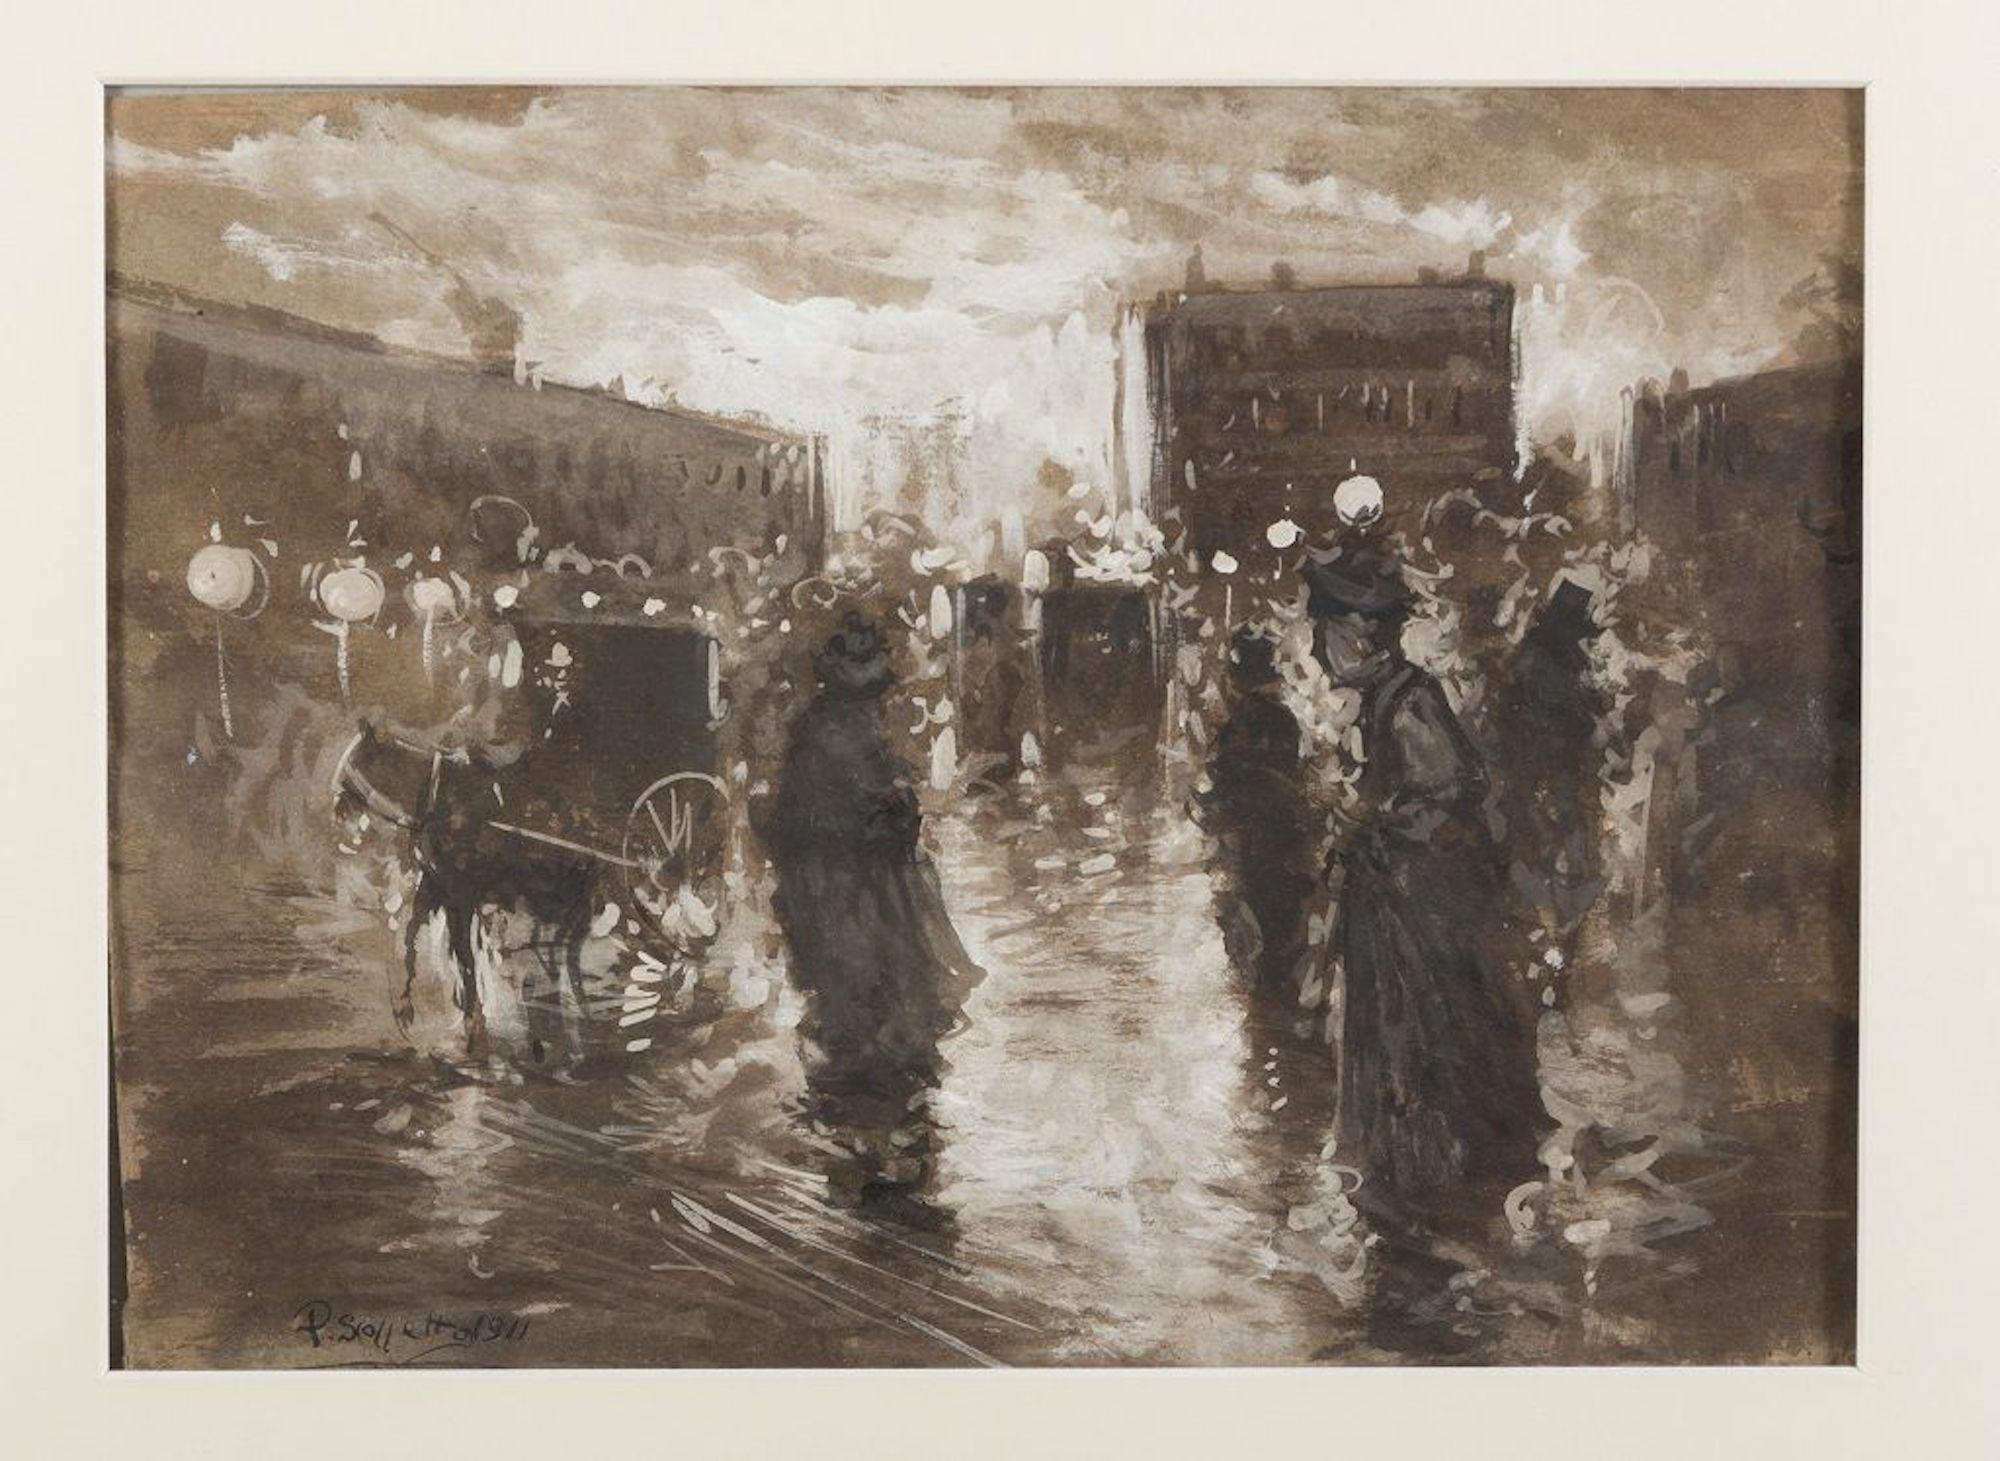 A Night in Paris - Mixed Media on Paper by P. Scoppetta - 1911